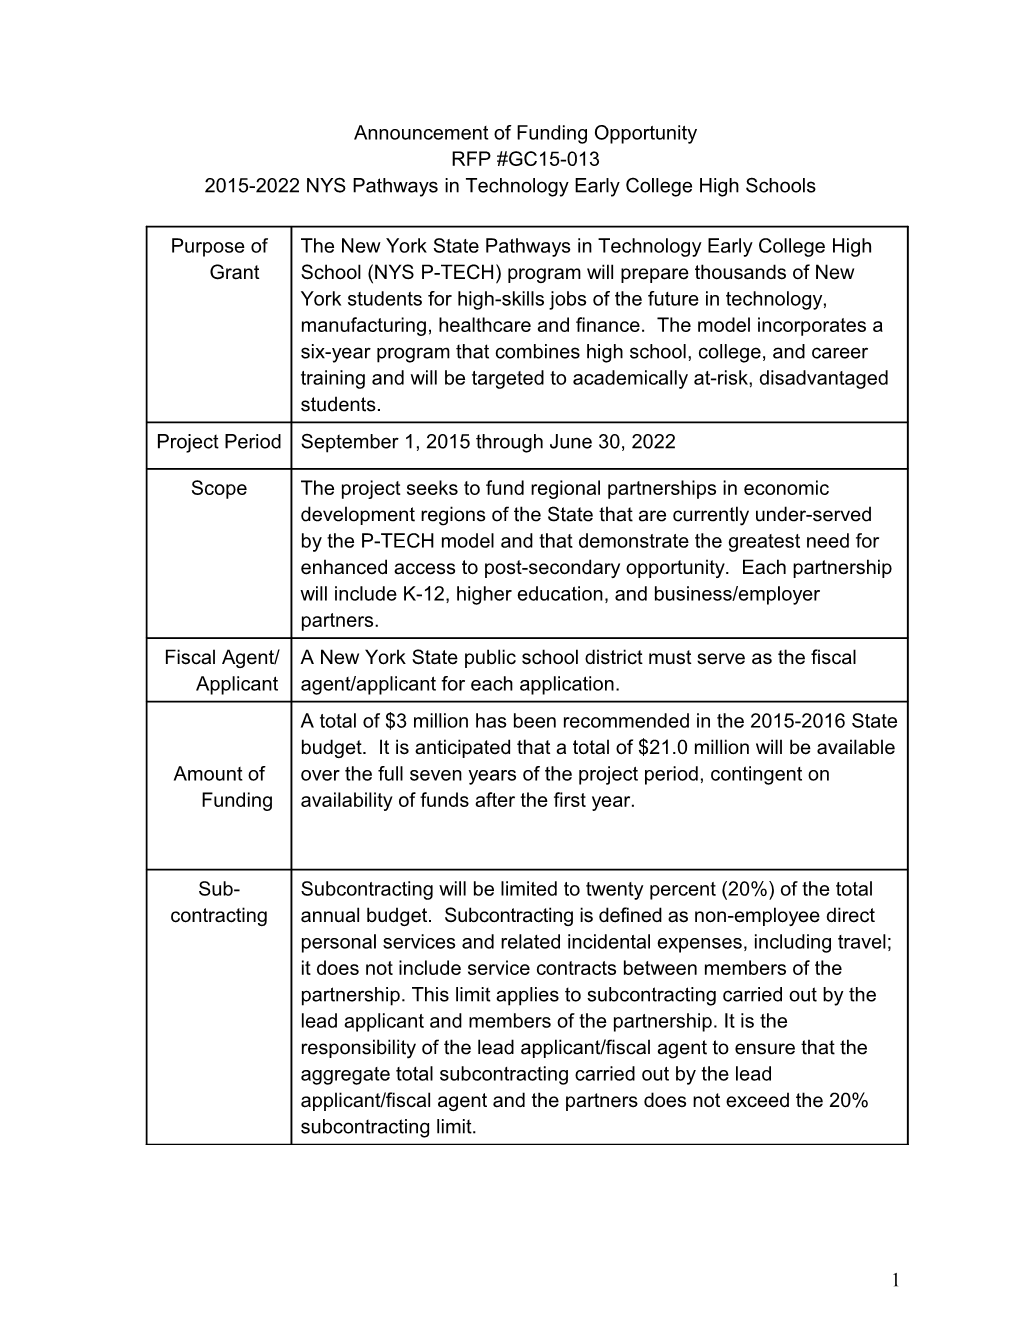 2015-2022 NYS Pathways in Technology Early College High Schools